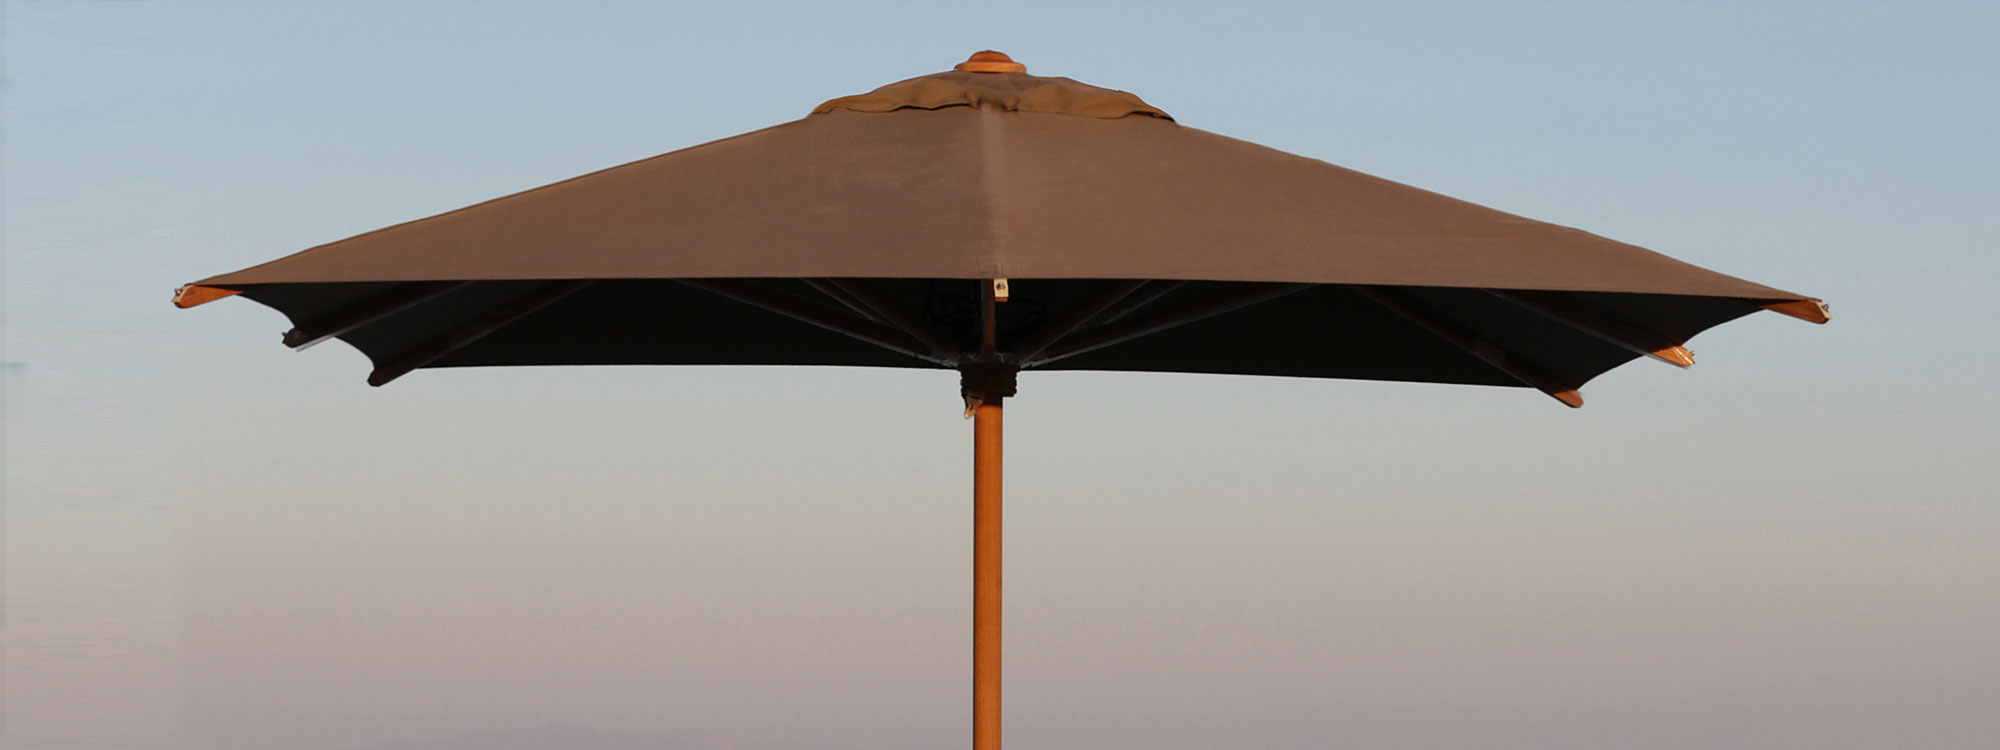 Image of Shady classic Teak parasol with cappuccino canopy by Royal Botania